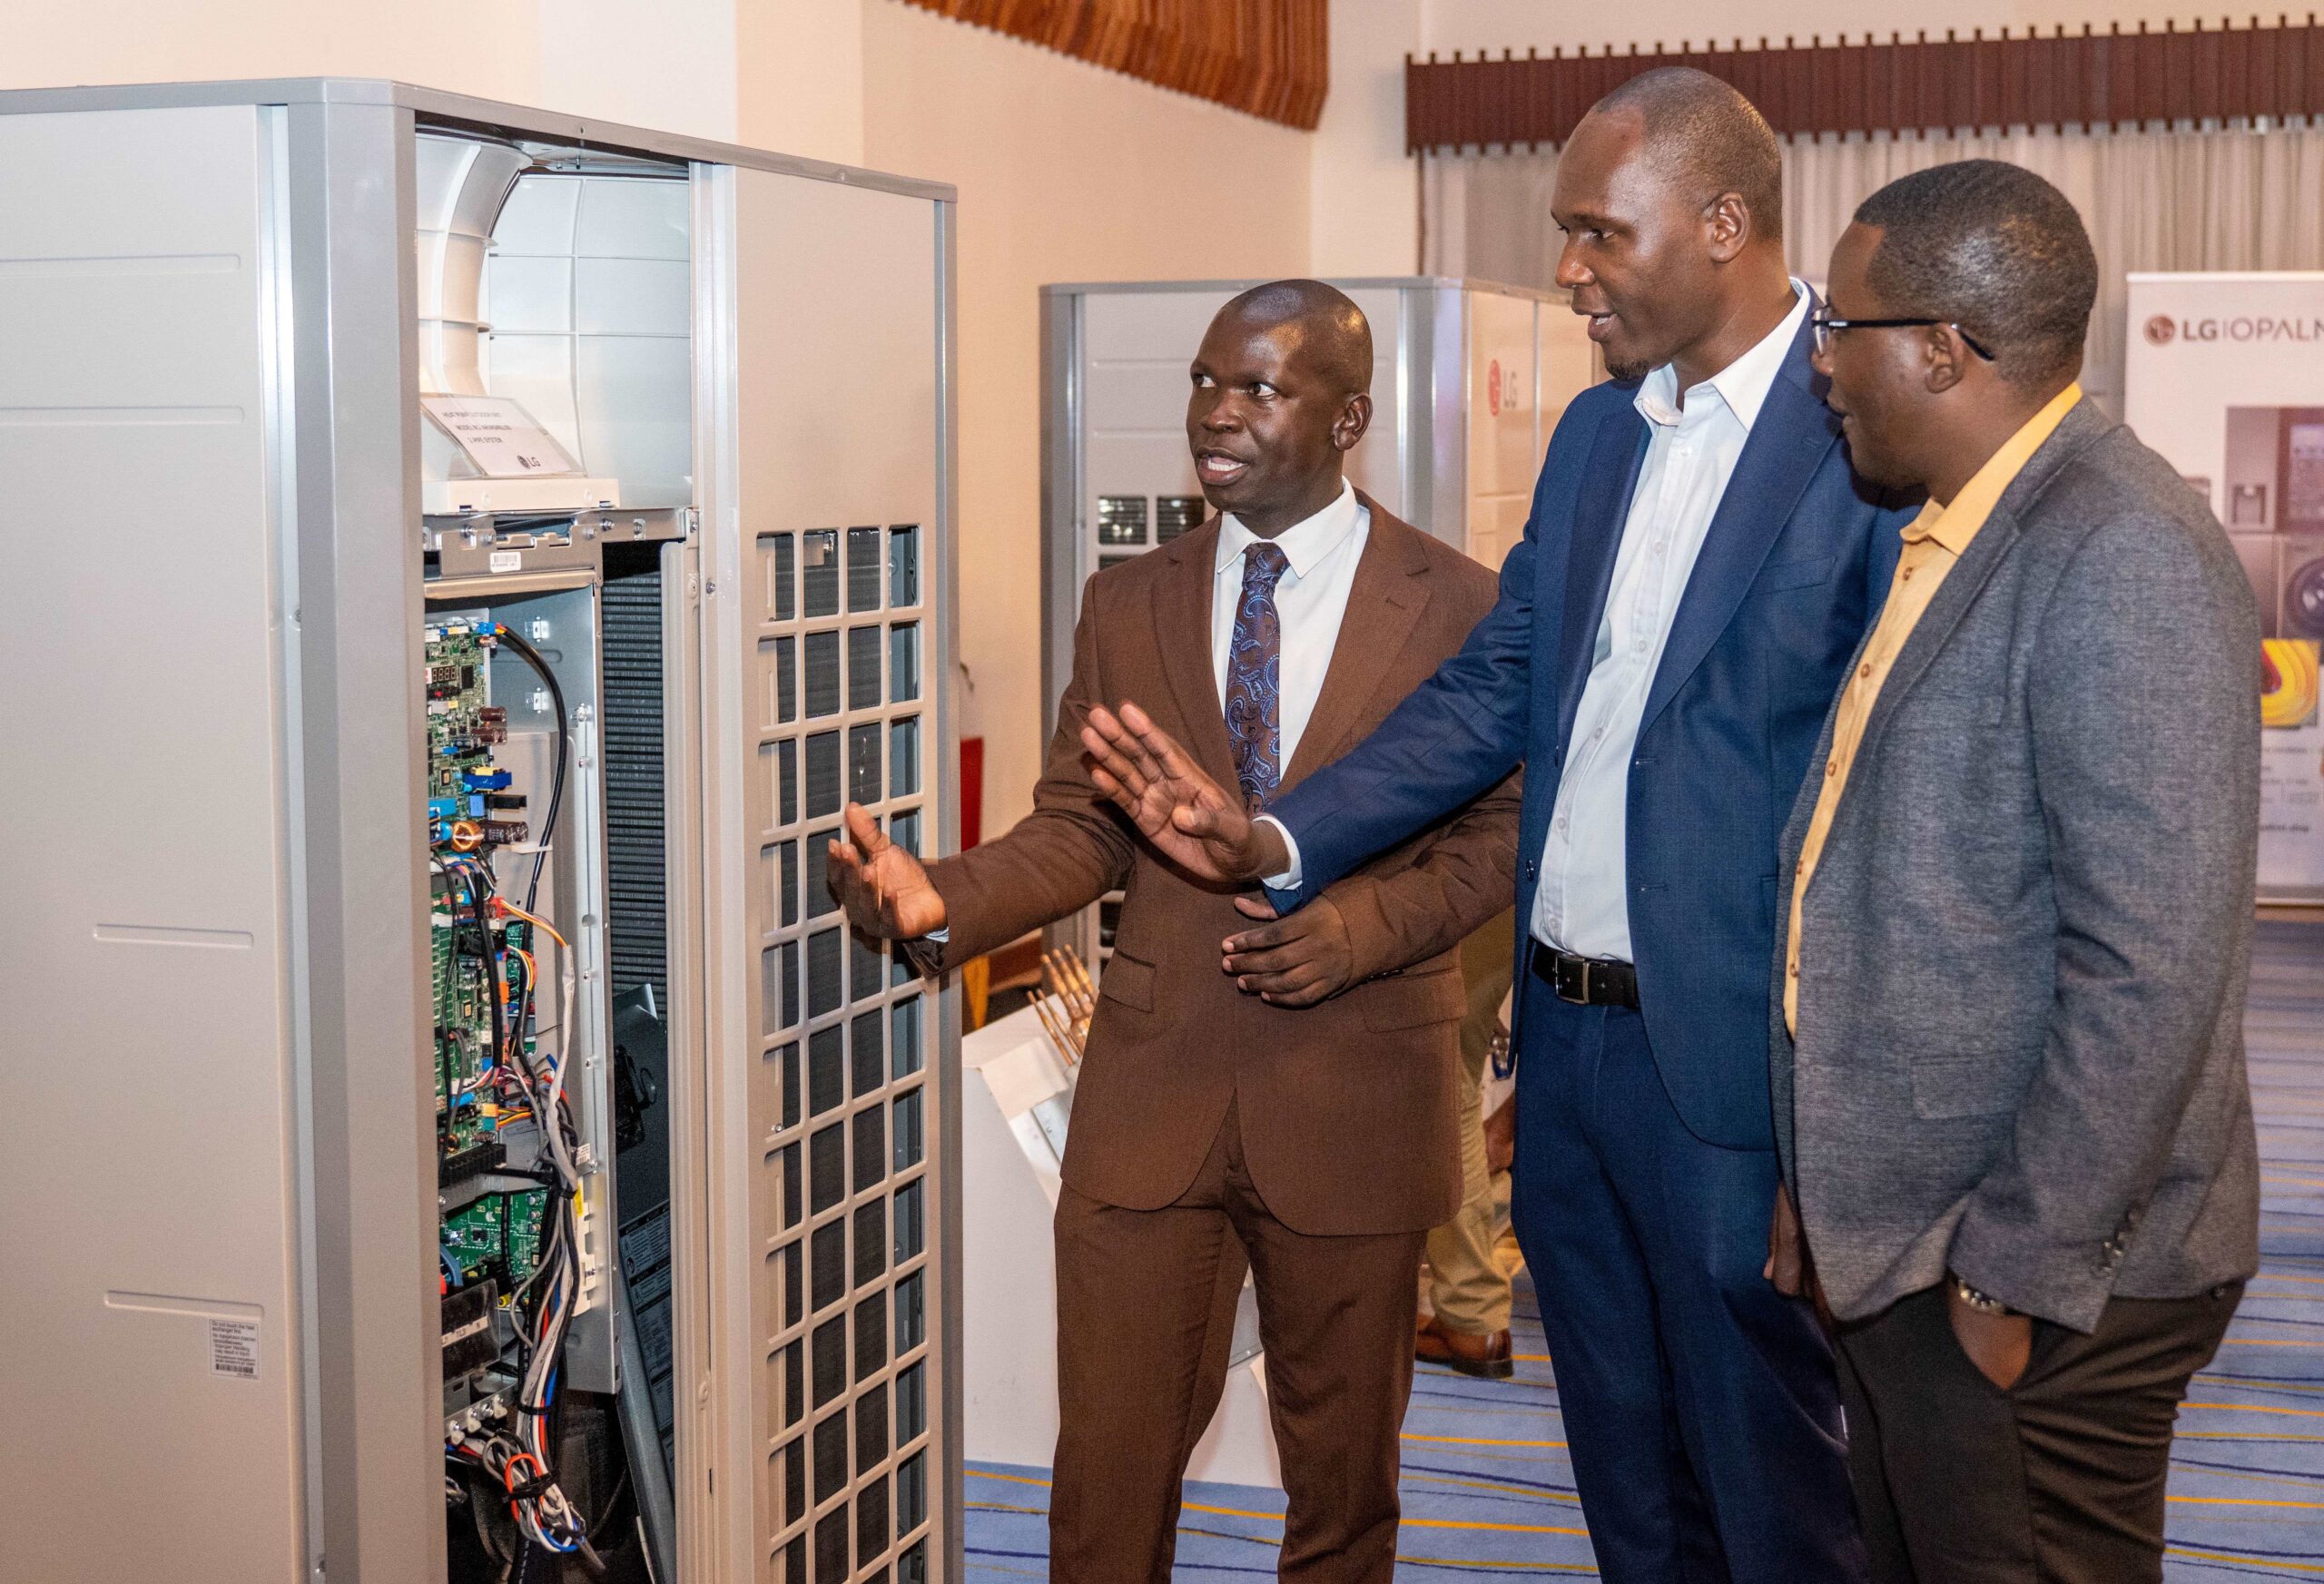 (L-R), LG Electronics EA Design SAC Design & Technical Training Engineer Barrack Onyango, LG Electronics East Africa Sales Manager for Commercial Air Conditioning Solutions Eric Kiprono Bett, and Opalnet Engineering Chief Executive Officer Brian Kitui discussing some of LG Electronics' cutting-edge air conditioning technologies during the LG-Opalnet Heating, Ventilation and Air Conditioning (HVAC) Night event